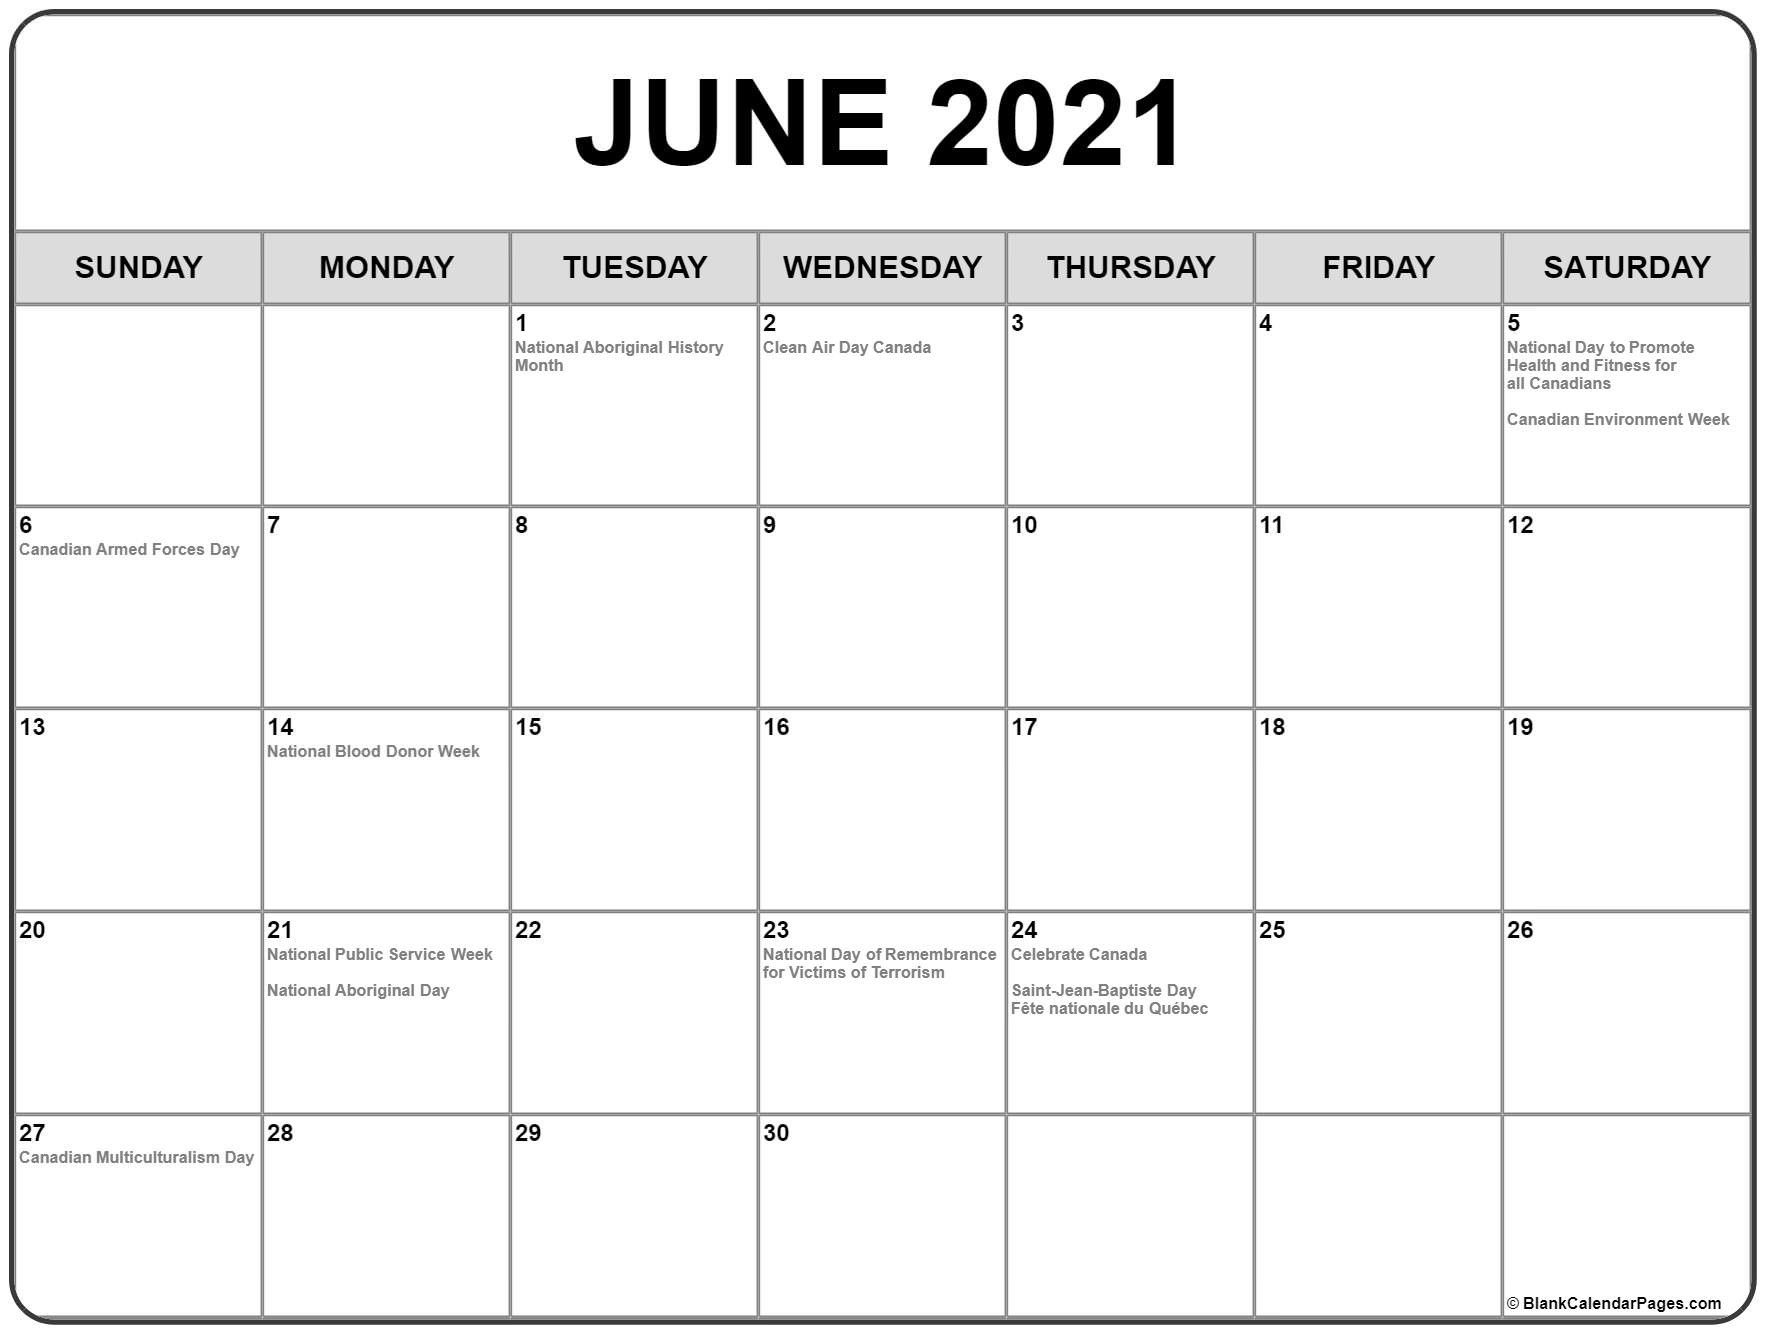 June 2021 Calendar With Holidays In 2021 | Calendar May